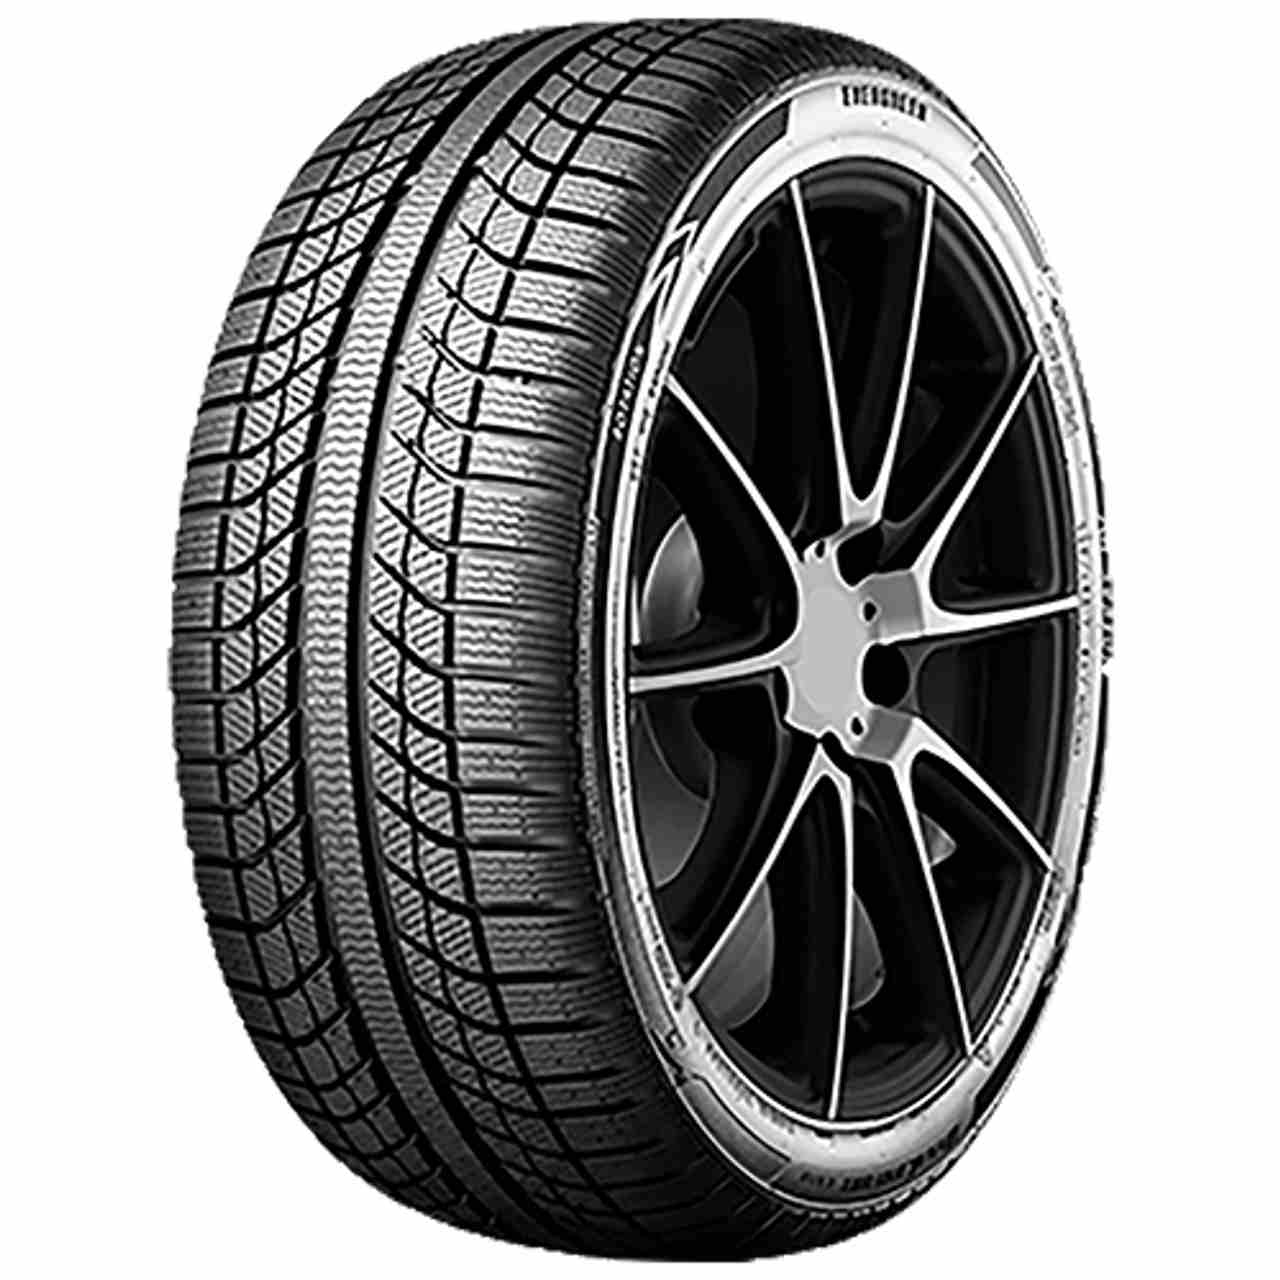 EVERGREEN DYNACOMFORT EA719 215/65R16 98H BSW